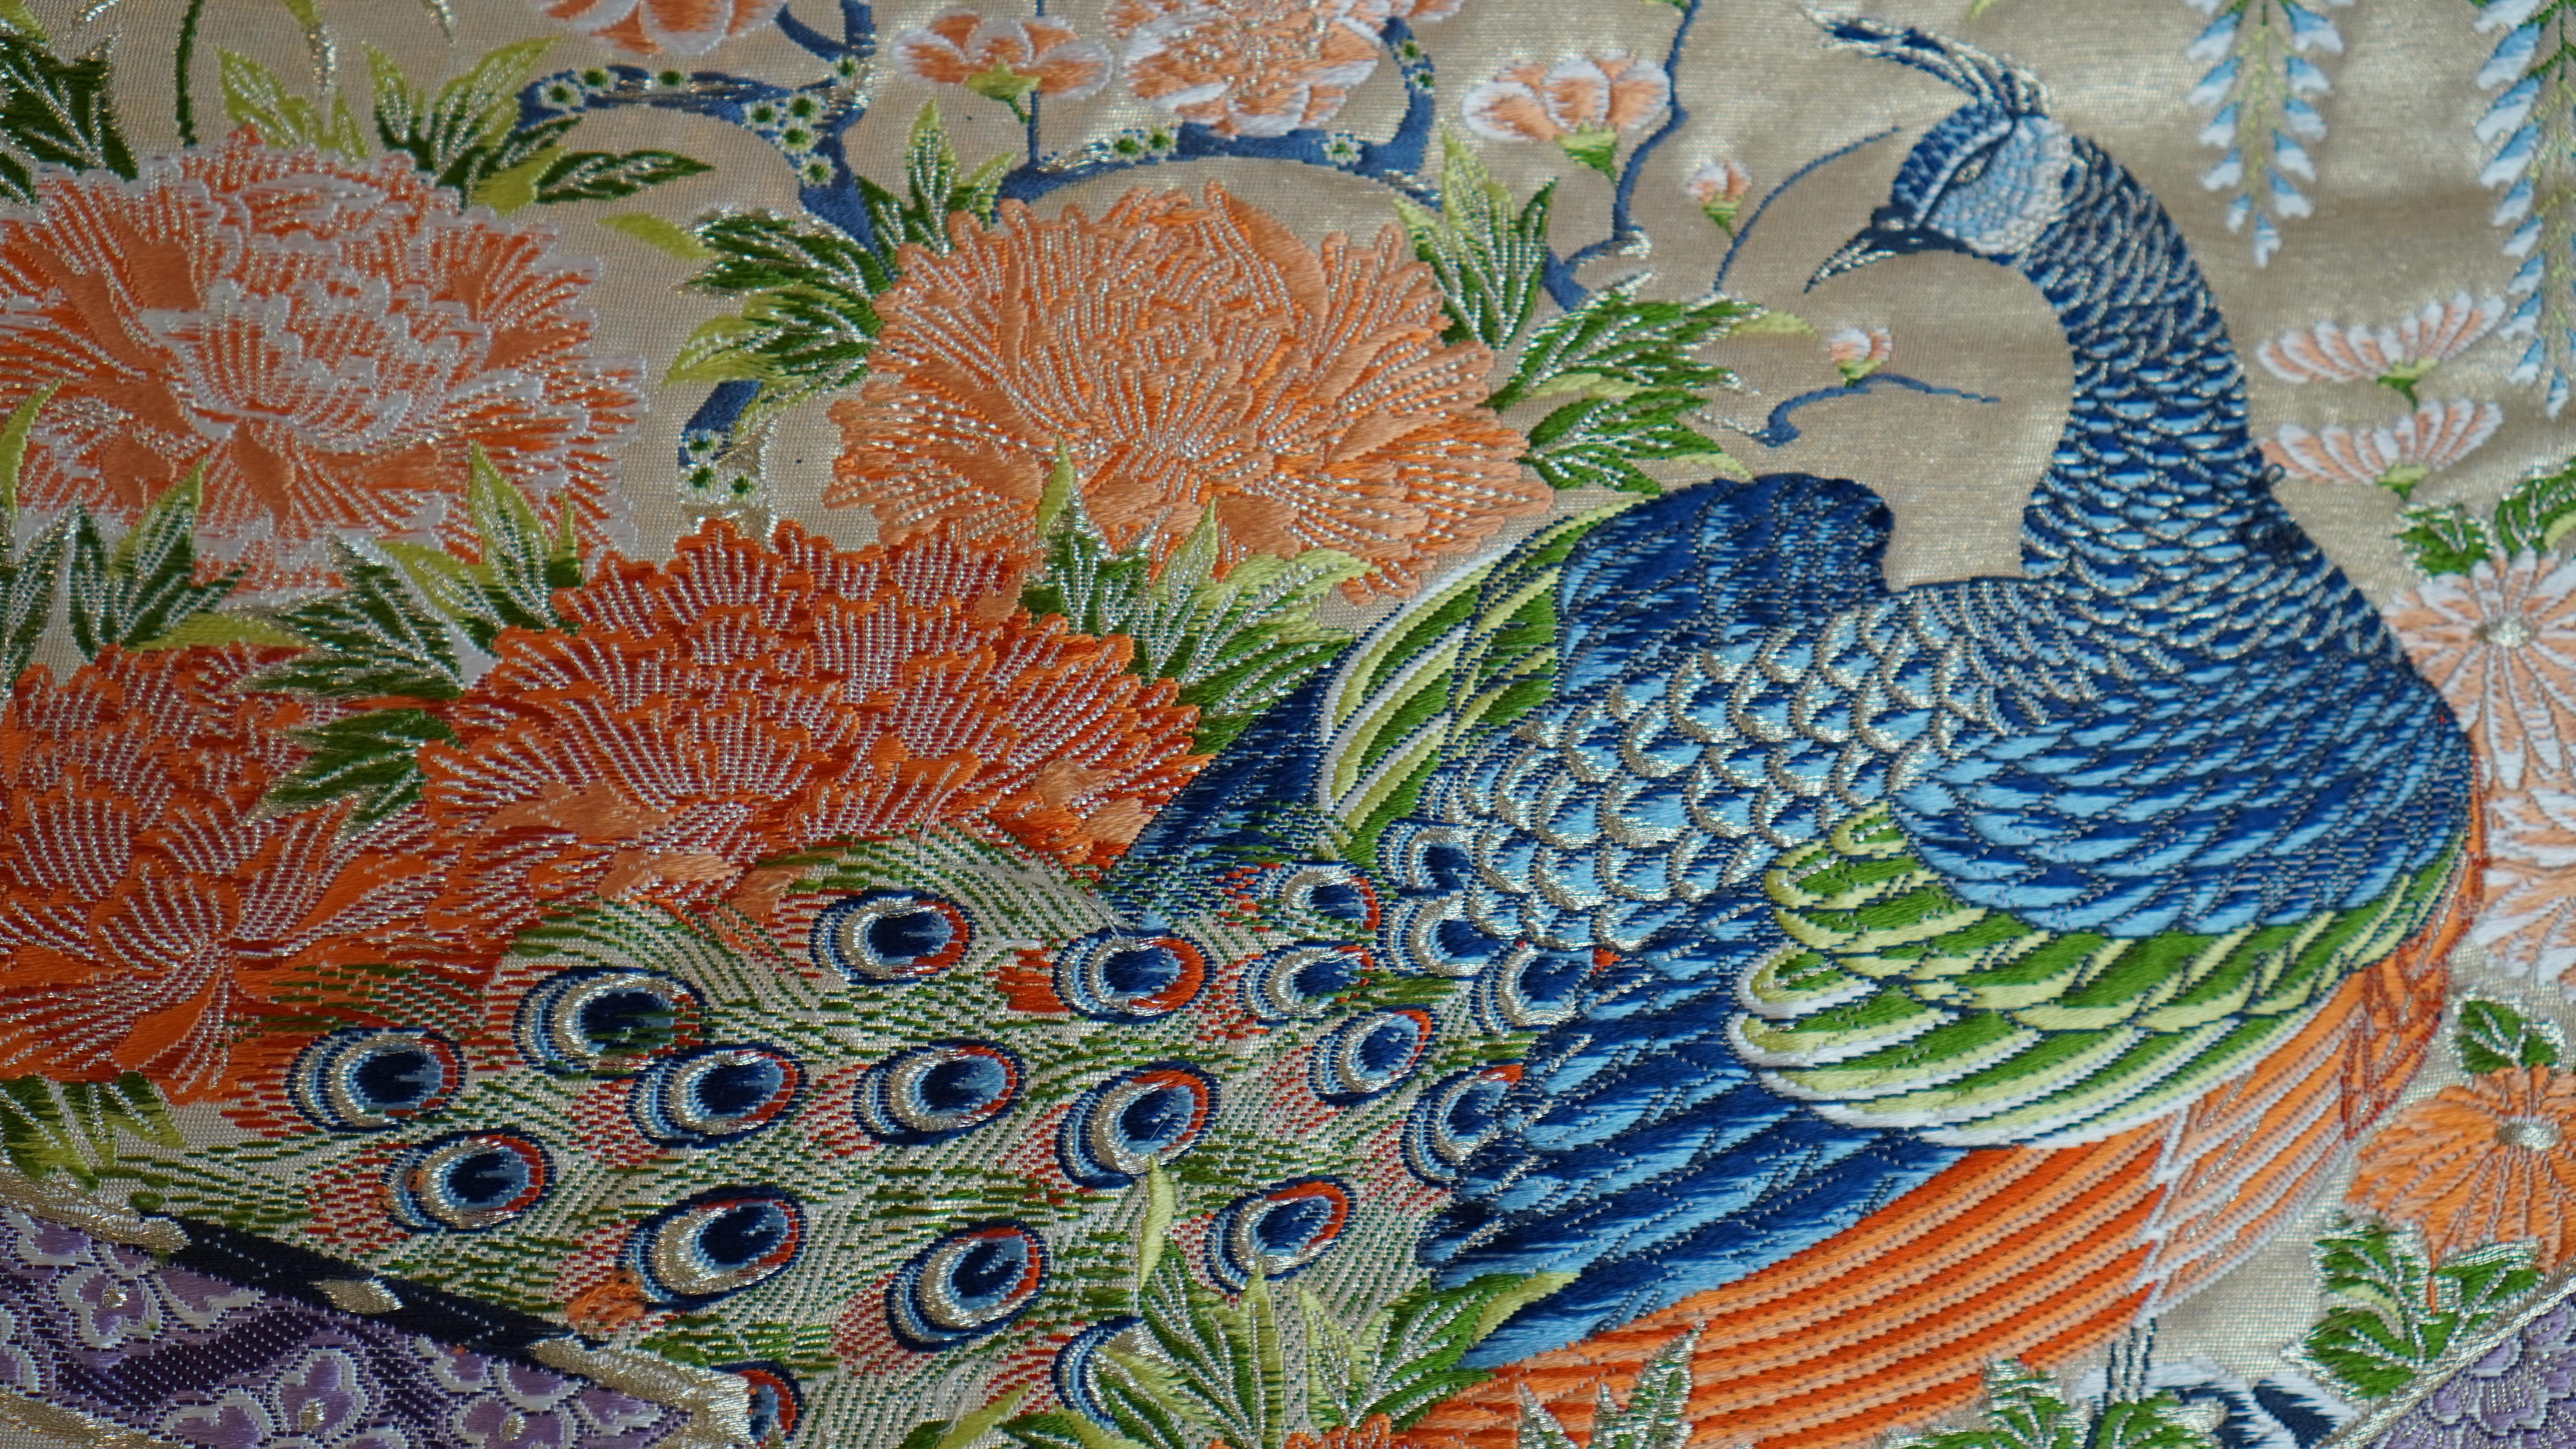 Embroidered Kimono Tapestry “The King of Peacocks” , Japanese Art, Japanese Hanging Scroll For Sale